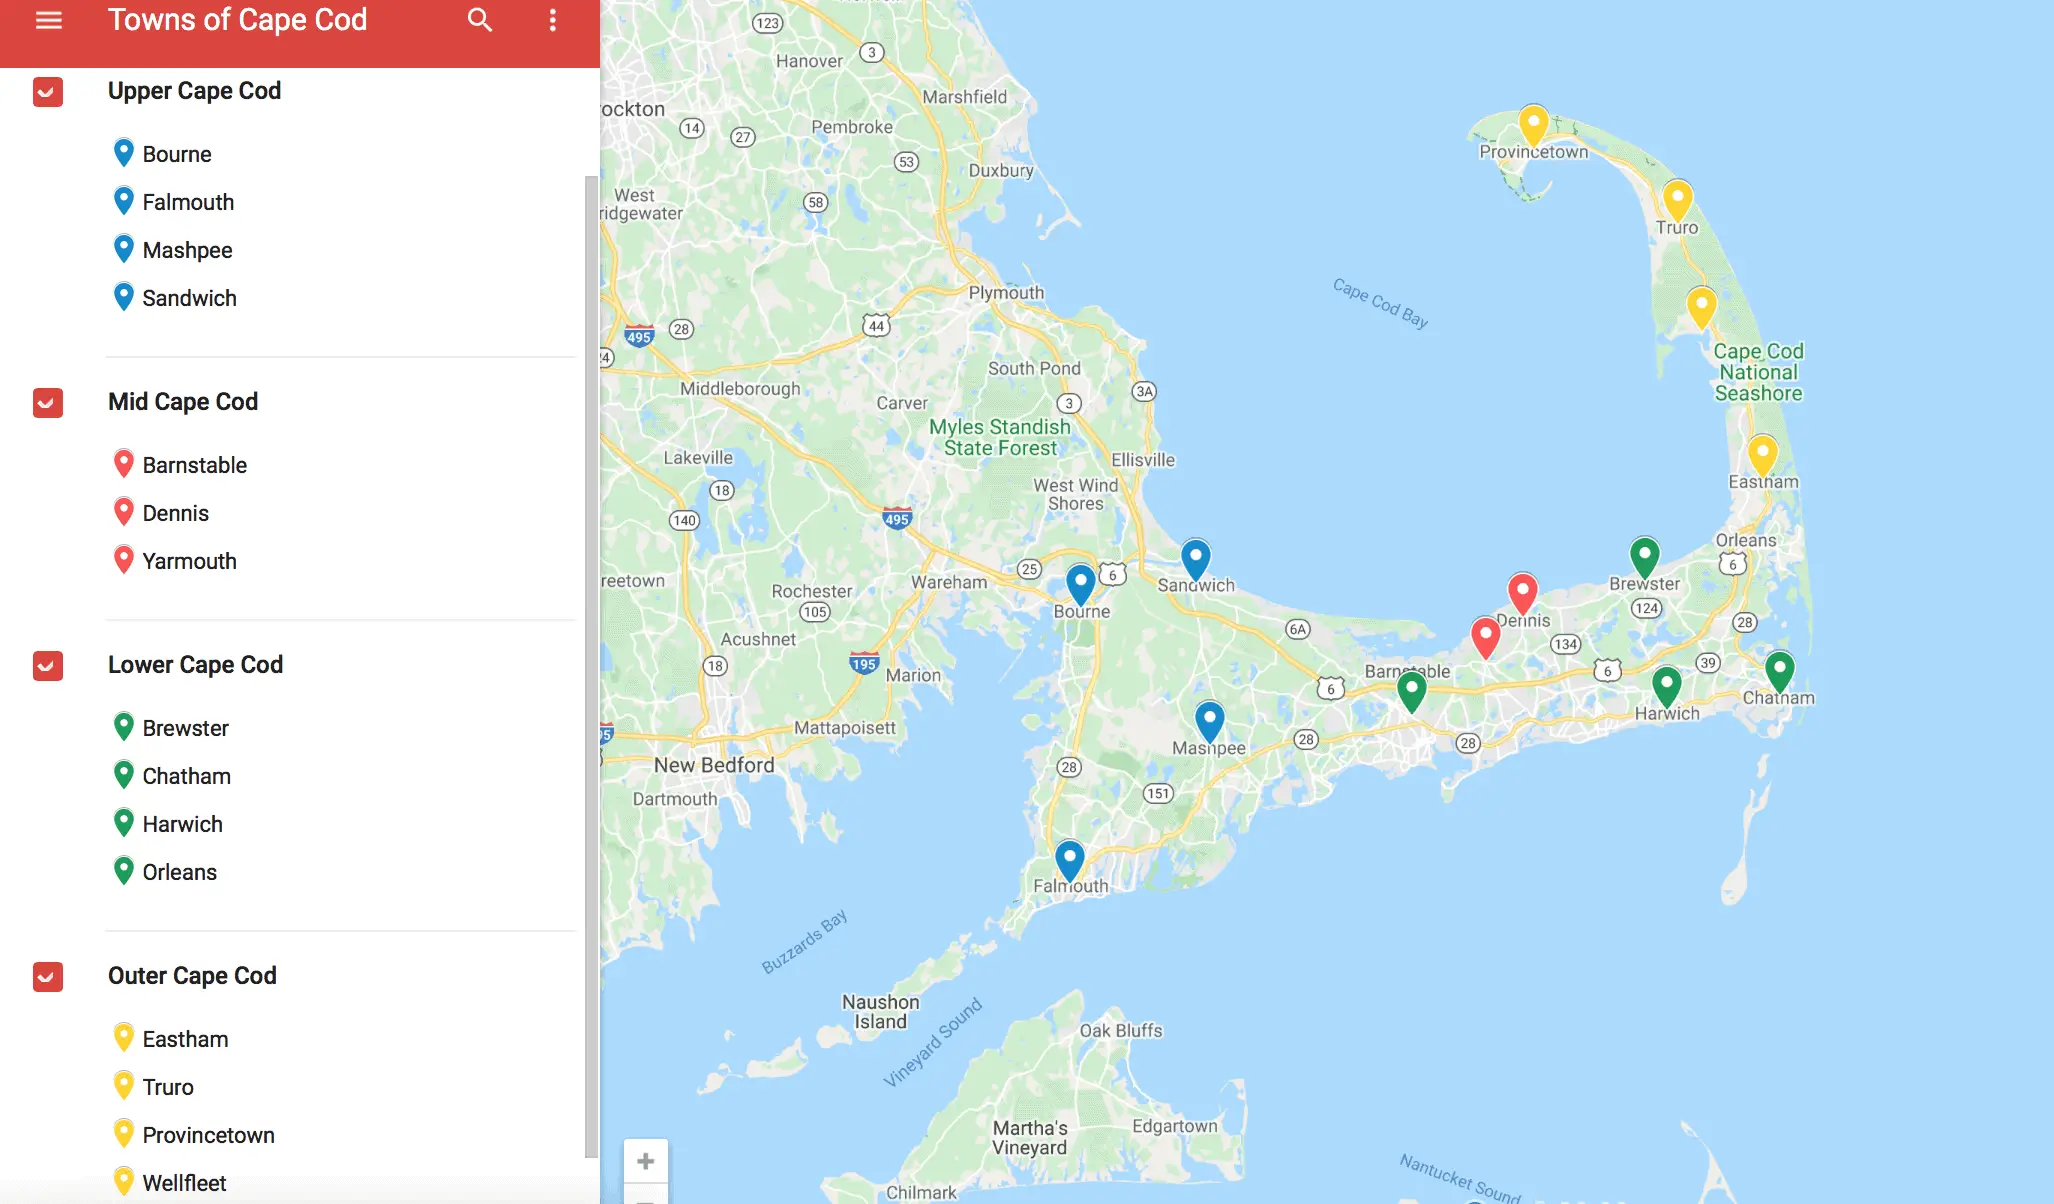 Towns of Cape Cod Map